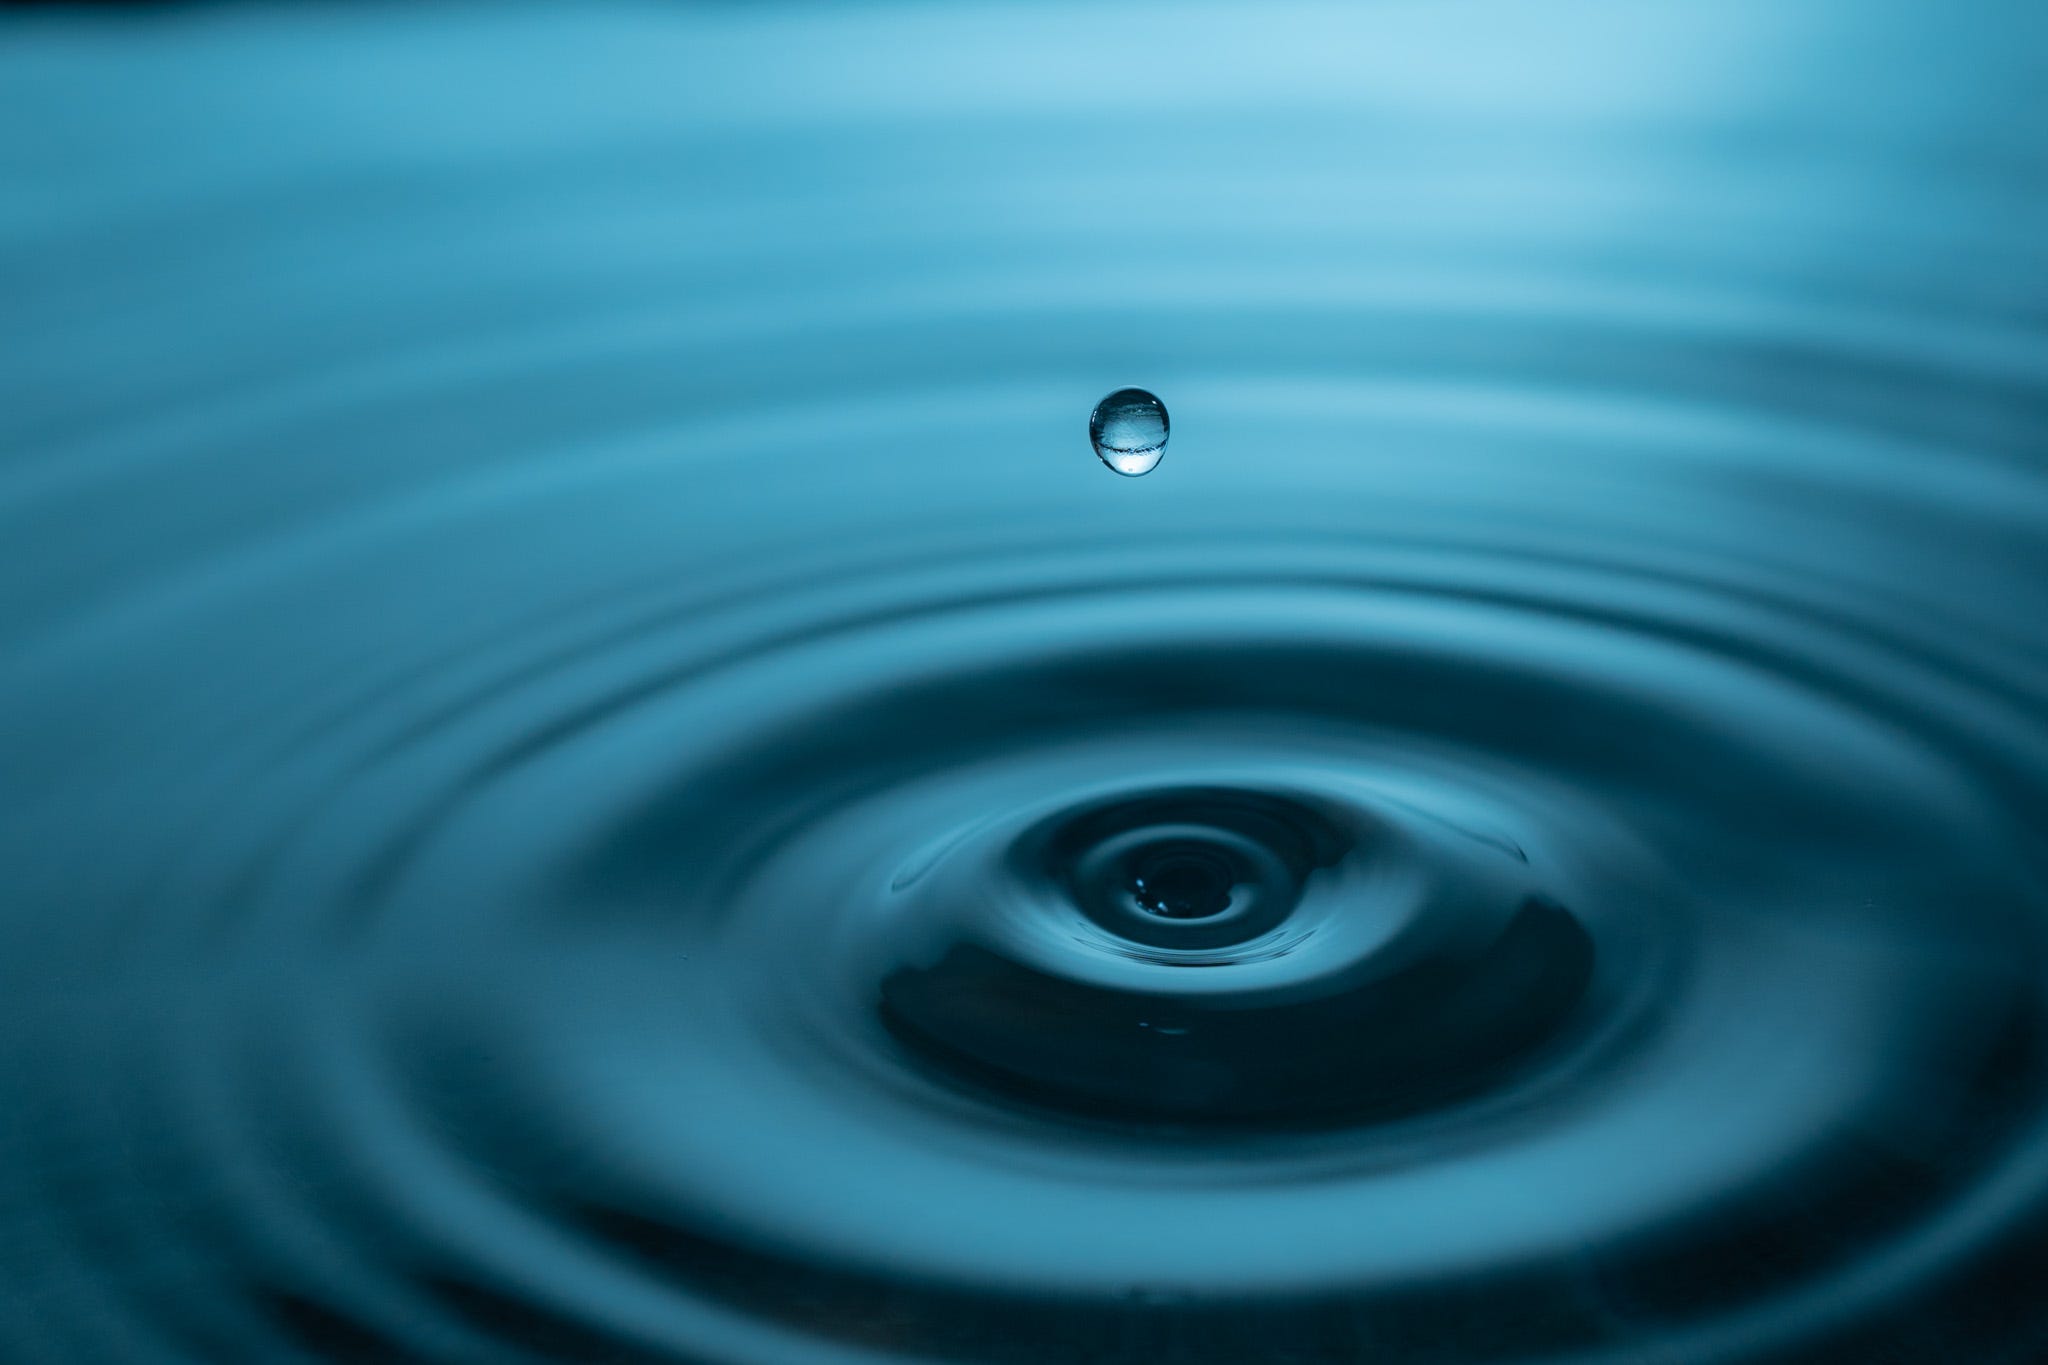 A water drop splashes into a pool of water creating a ripple effect with a reflection of the water in the droplet. A light filter causes water and droplet to look blue.